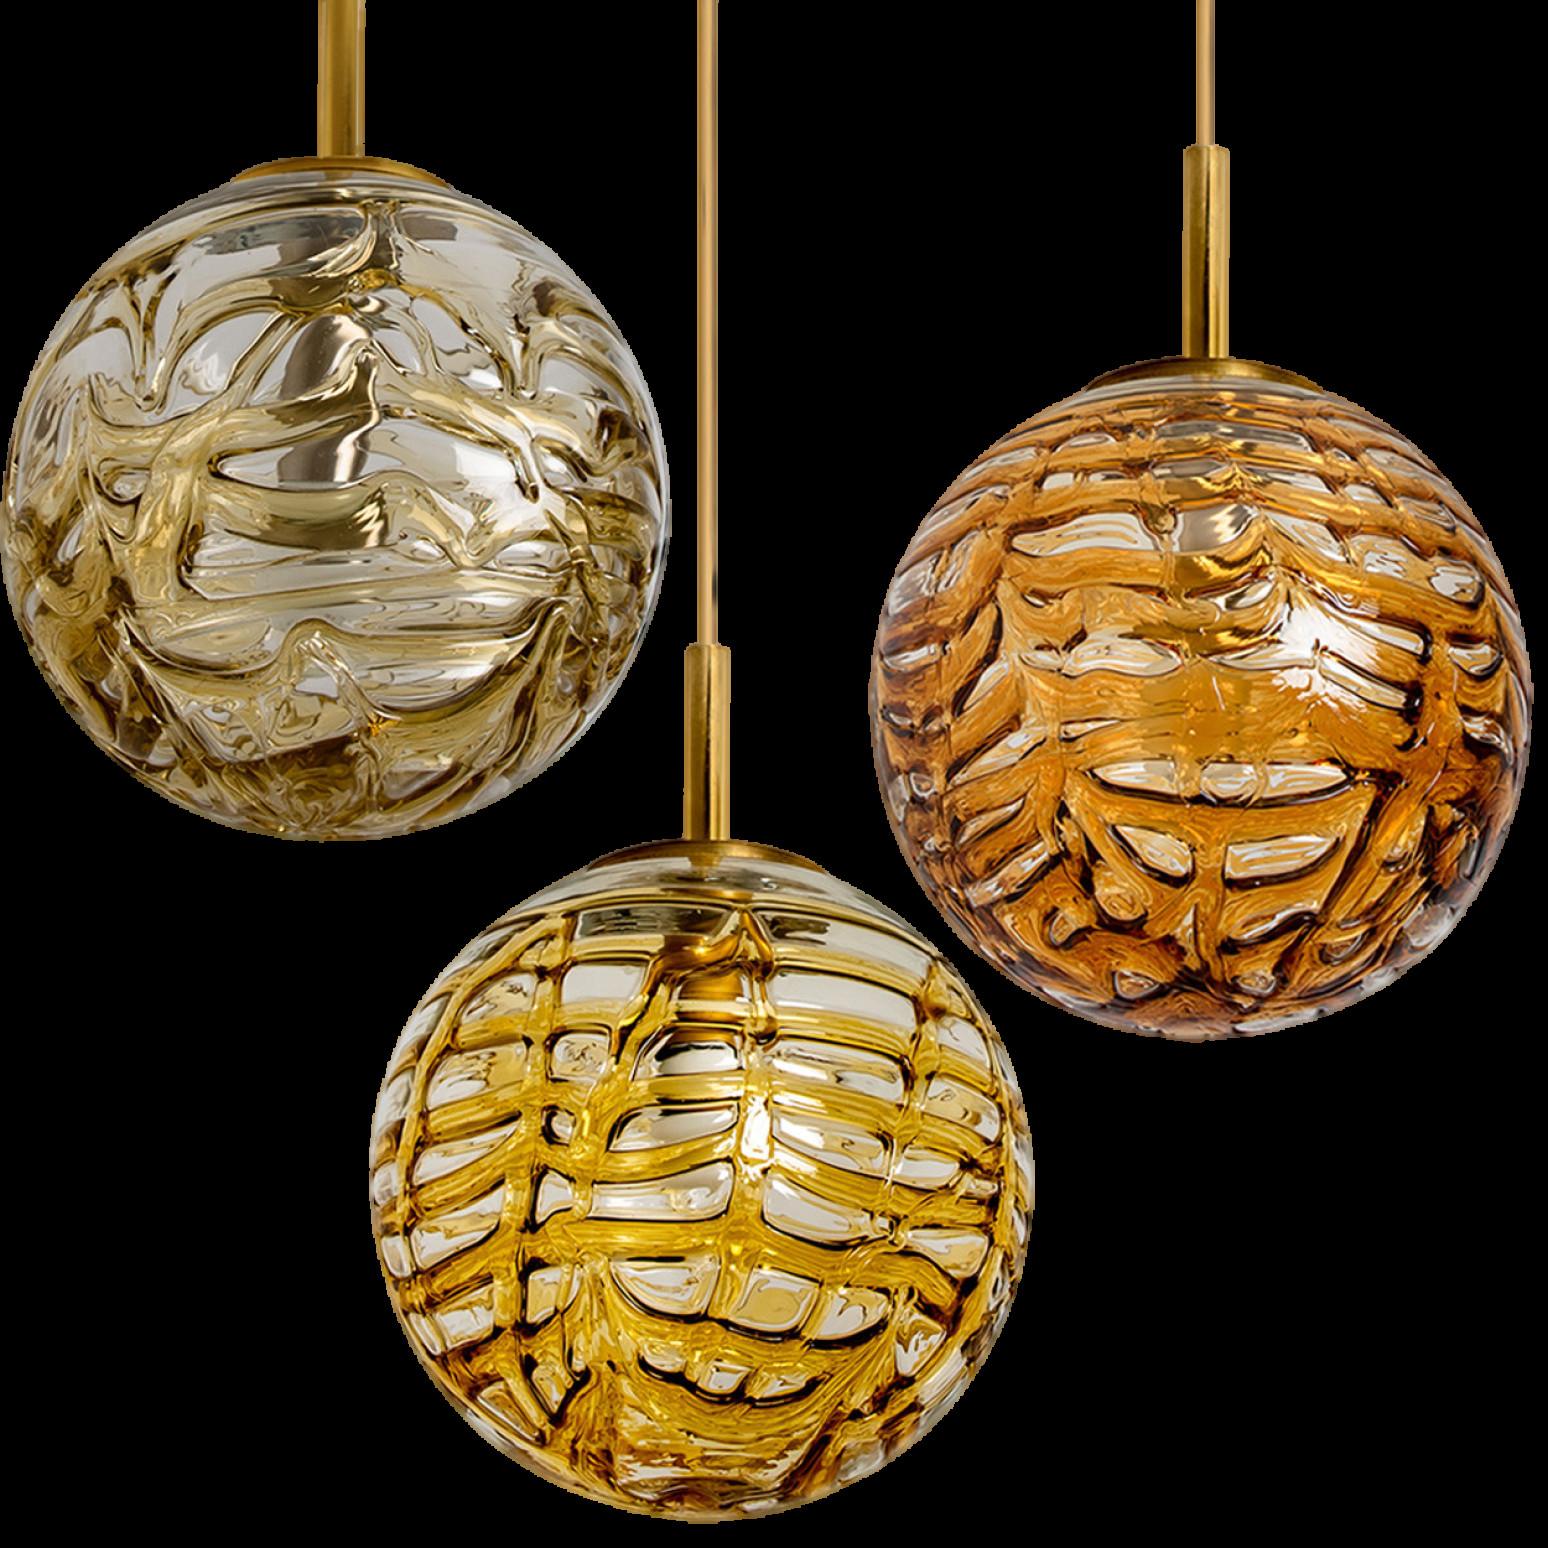 1 of the 3 Doria Leuchten globes (in collaboration with Murano) in the style of Venini, manufactured, circa 1960. Real statement piece.

High-end thick Murano crystal glass shades made out of overlay glasses in the colors Taupe, Yellow and Orange,